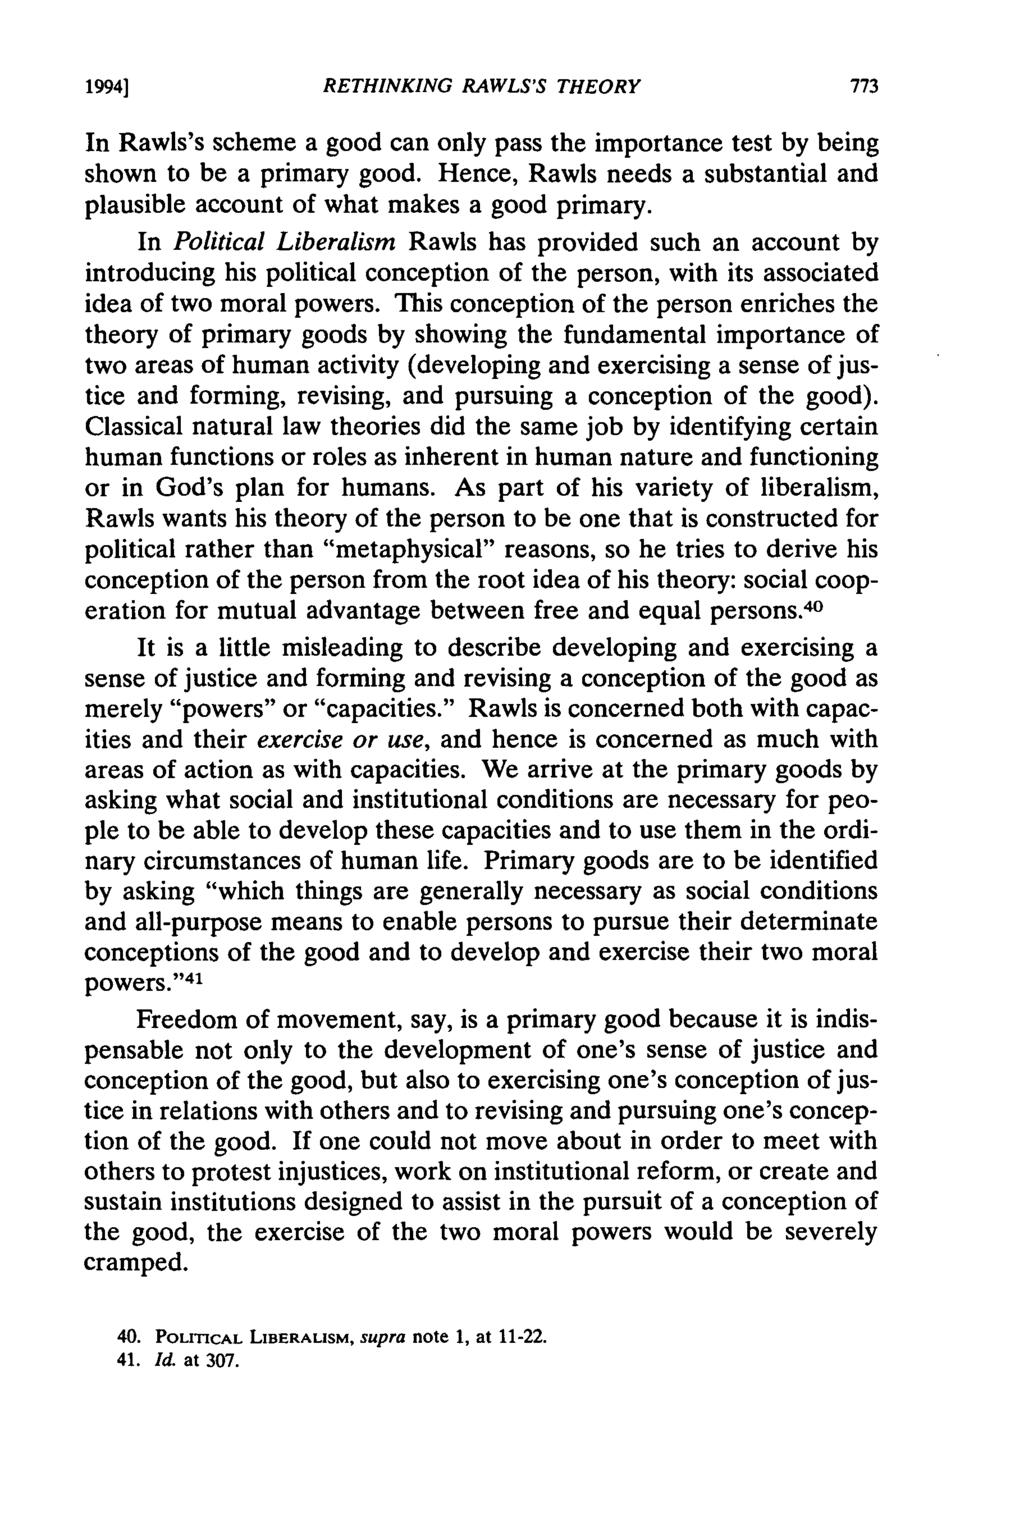 1994] RETHINKING RAWLS'S THEORY In Rawls's scheme a good can only pass the importance test by being shown to be a primary good.